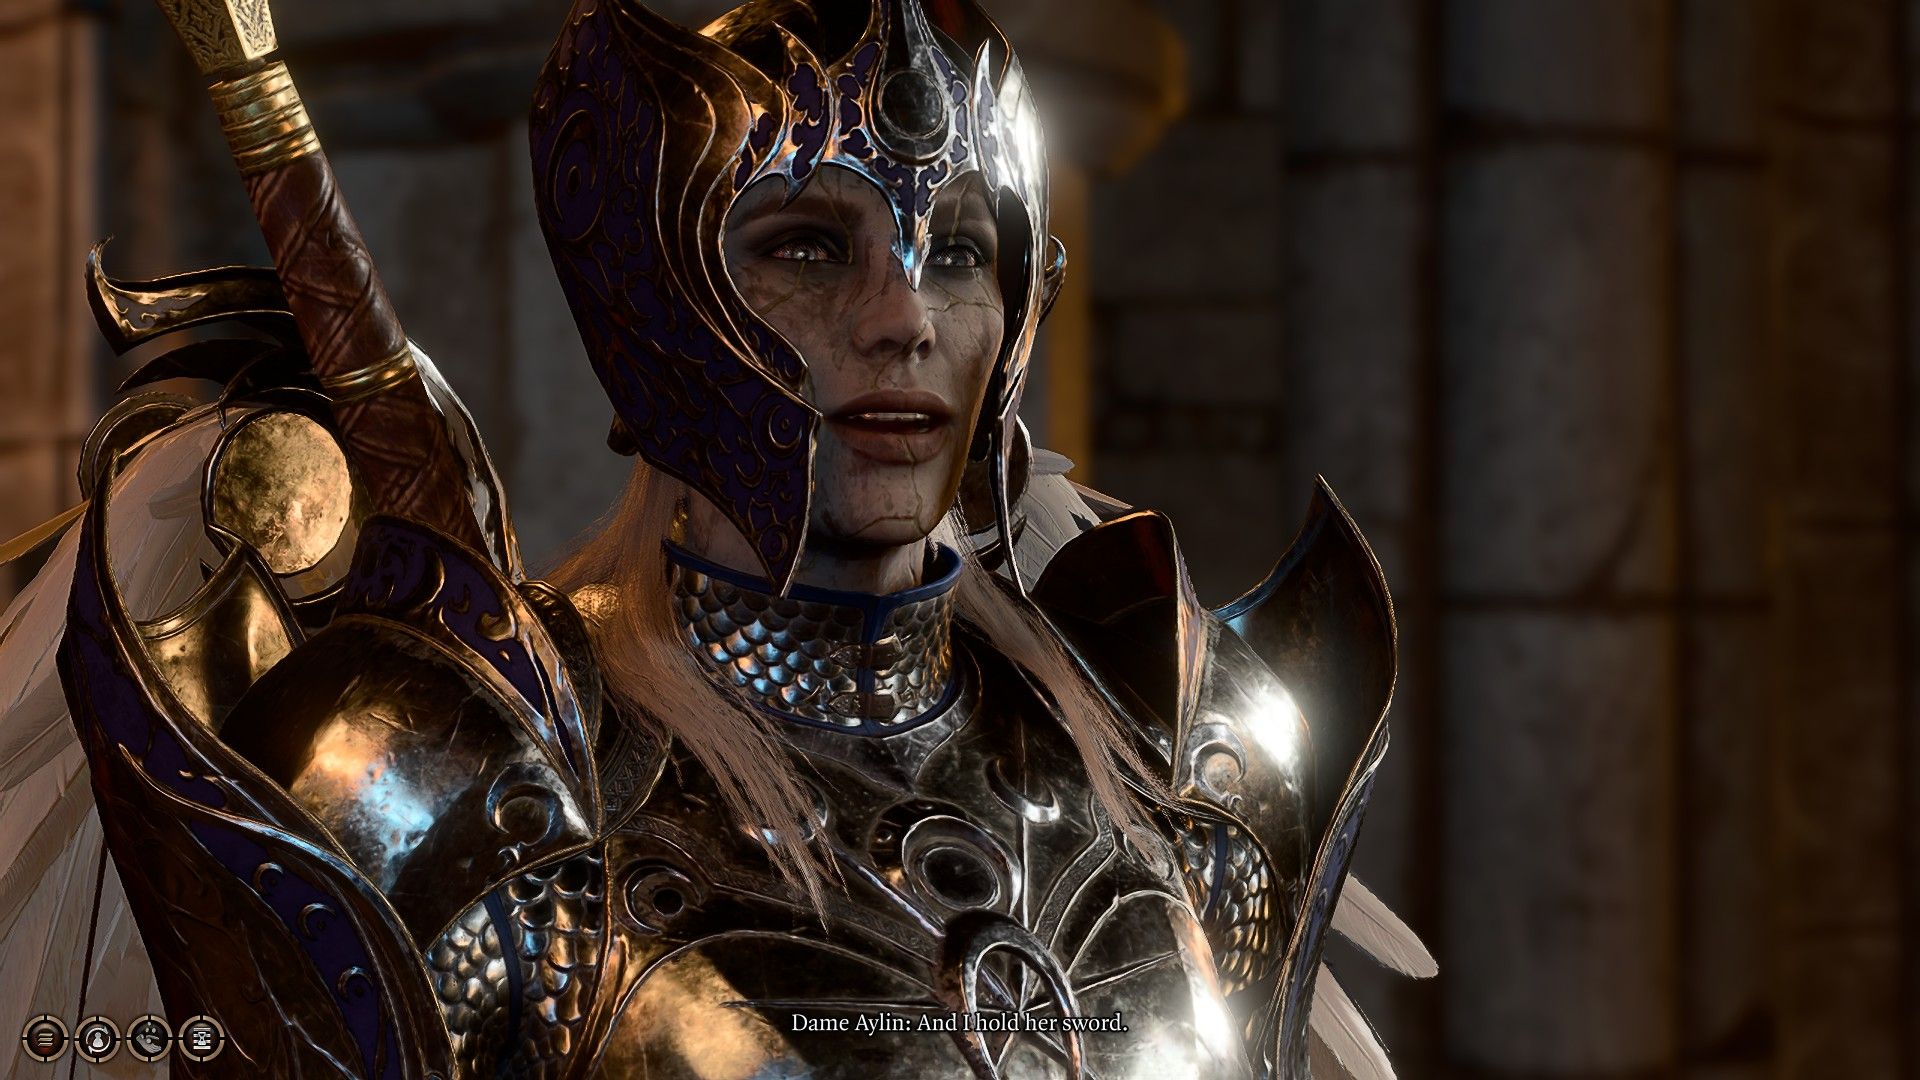 Dame Aylin Stands Ready For Battle During Final Fight Reunion In Baldur's Gate 3